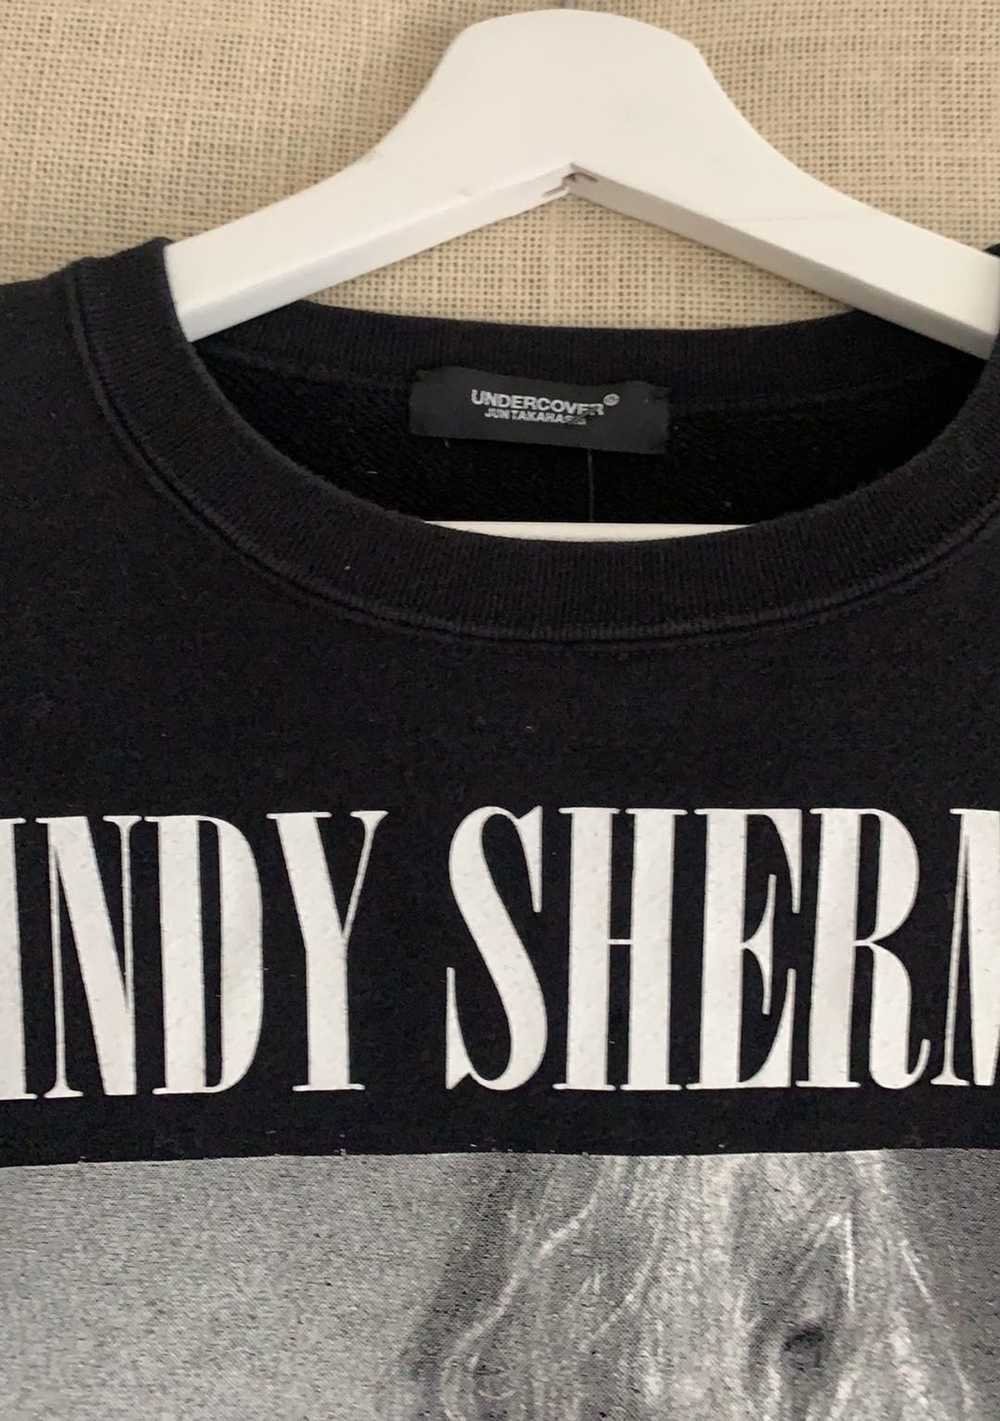 Undercover UNDERCOVER CINDY SHERMAN sweater - image 4